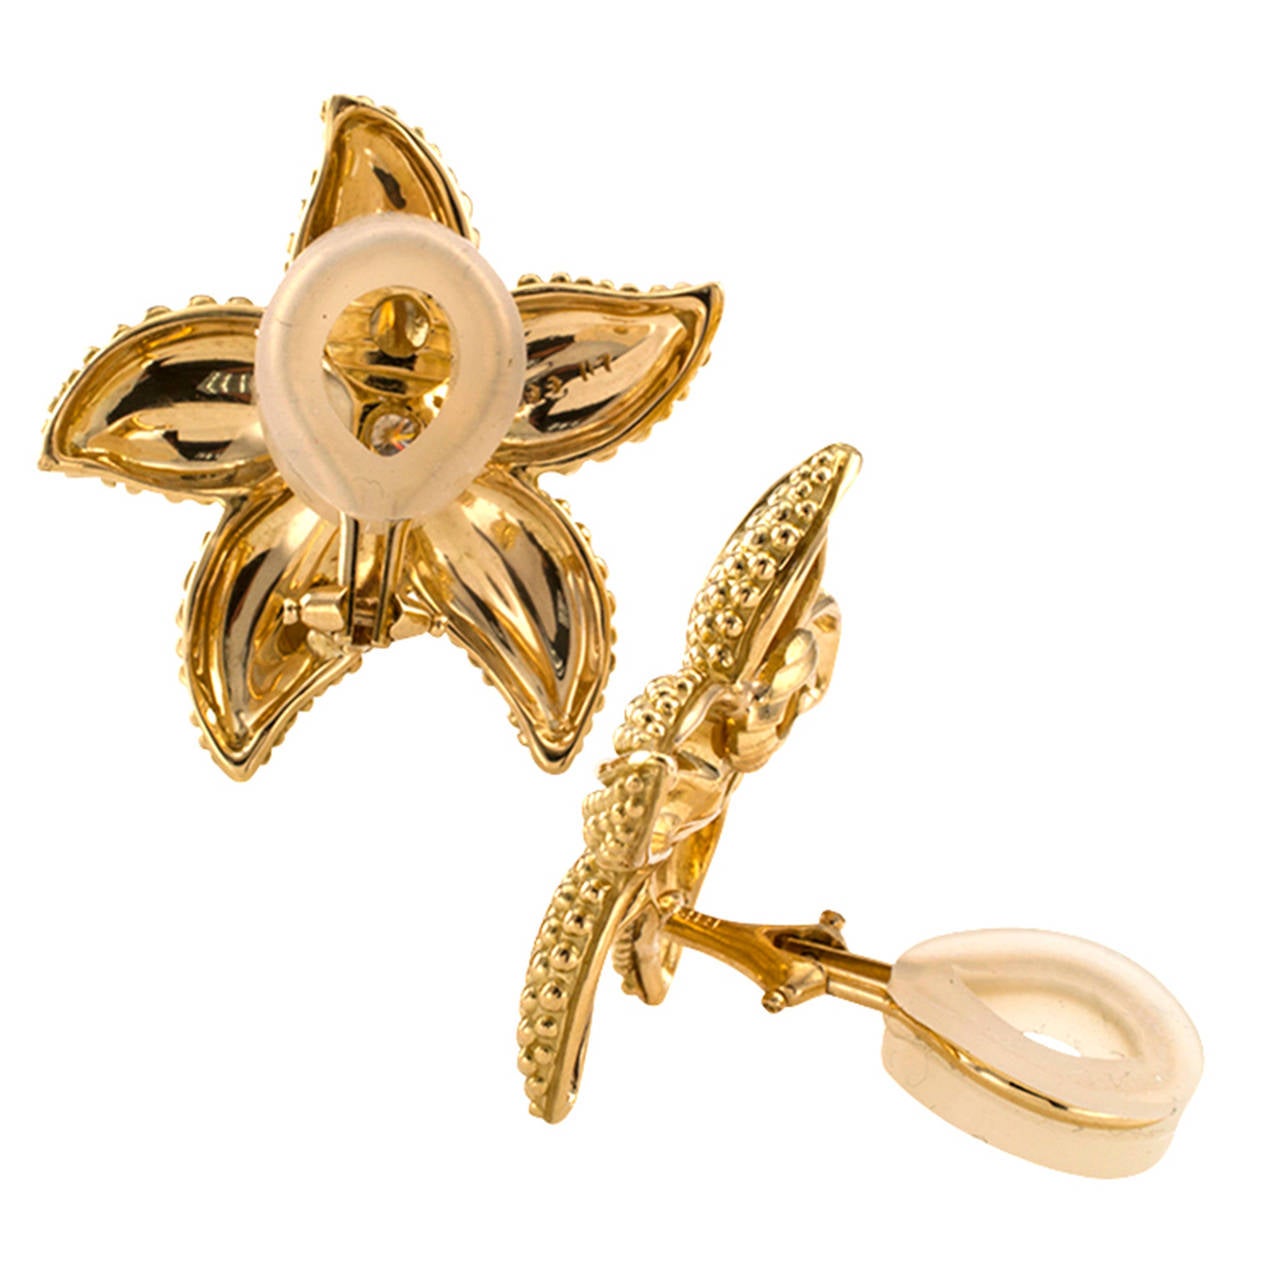 Diamond And Textured 18 Karat Gold Sea Star Ear Clips

Simple and sophisticated, these lovely starfish-shaped ear clips have all the qualifications of an attractive every day pair of gold earrings. Each is set at the center with a round